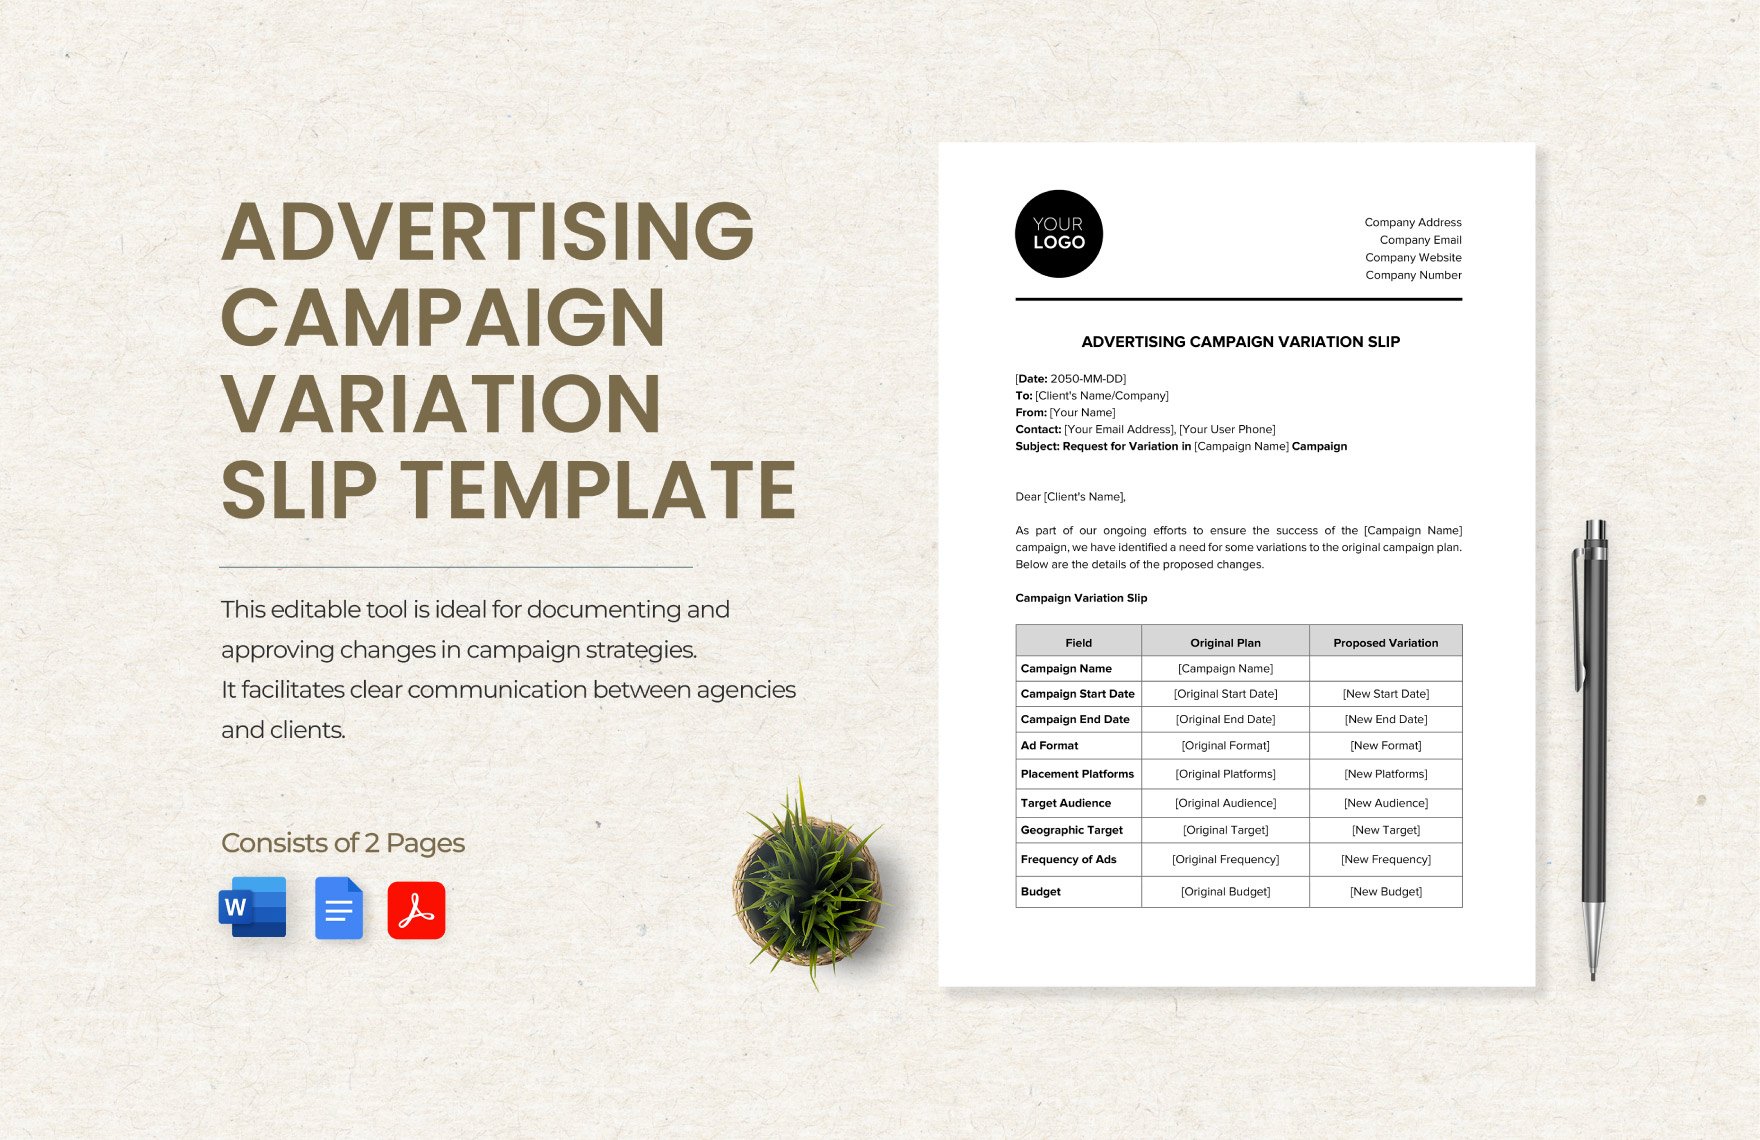 Advertising Campaign Variation Slip Template in Word, Google Docs, PDF